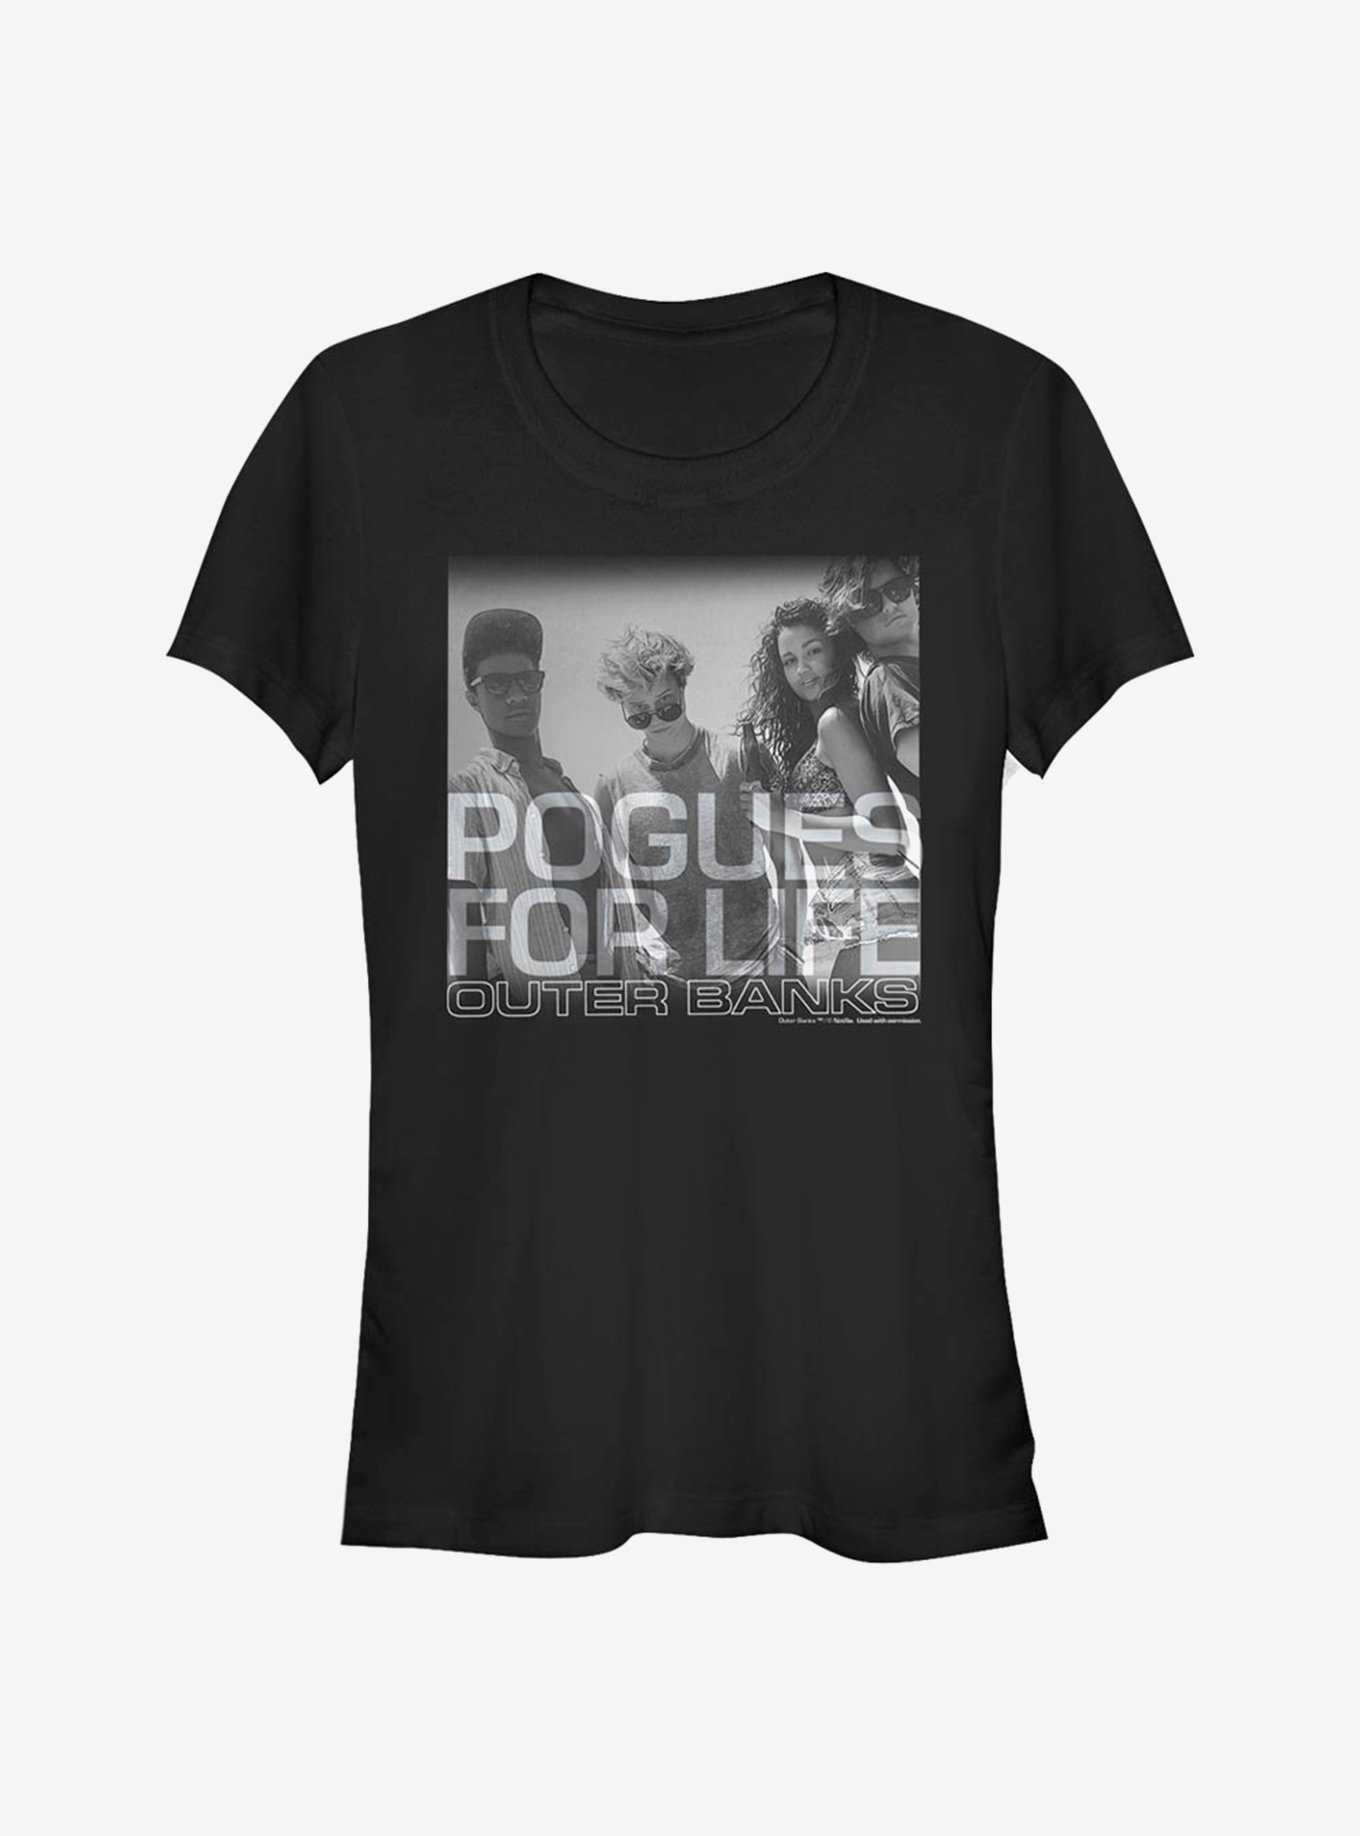 Outer Banks Pogues For Life Girls T-Shirt, , hi-res